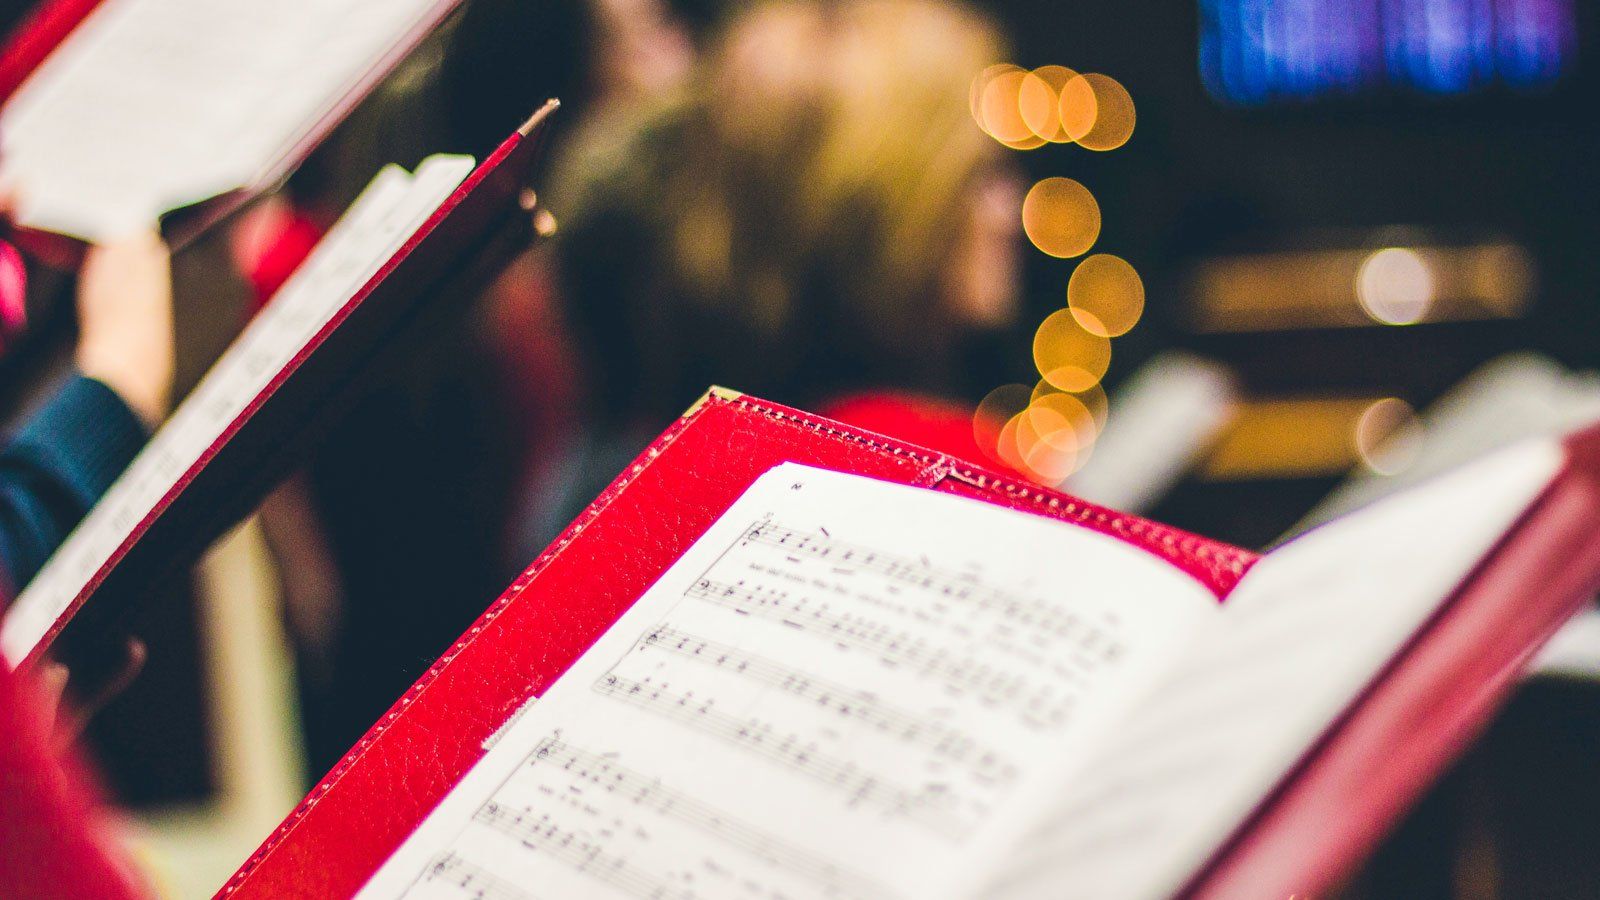 Sheet music on red notebook in foreground with warm blurred bokeh in background